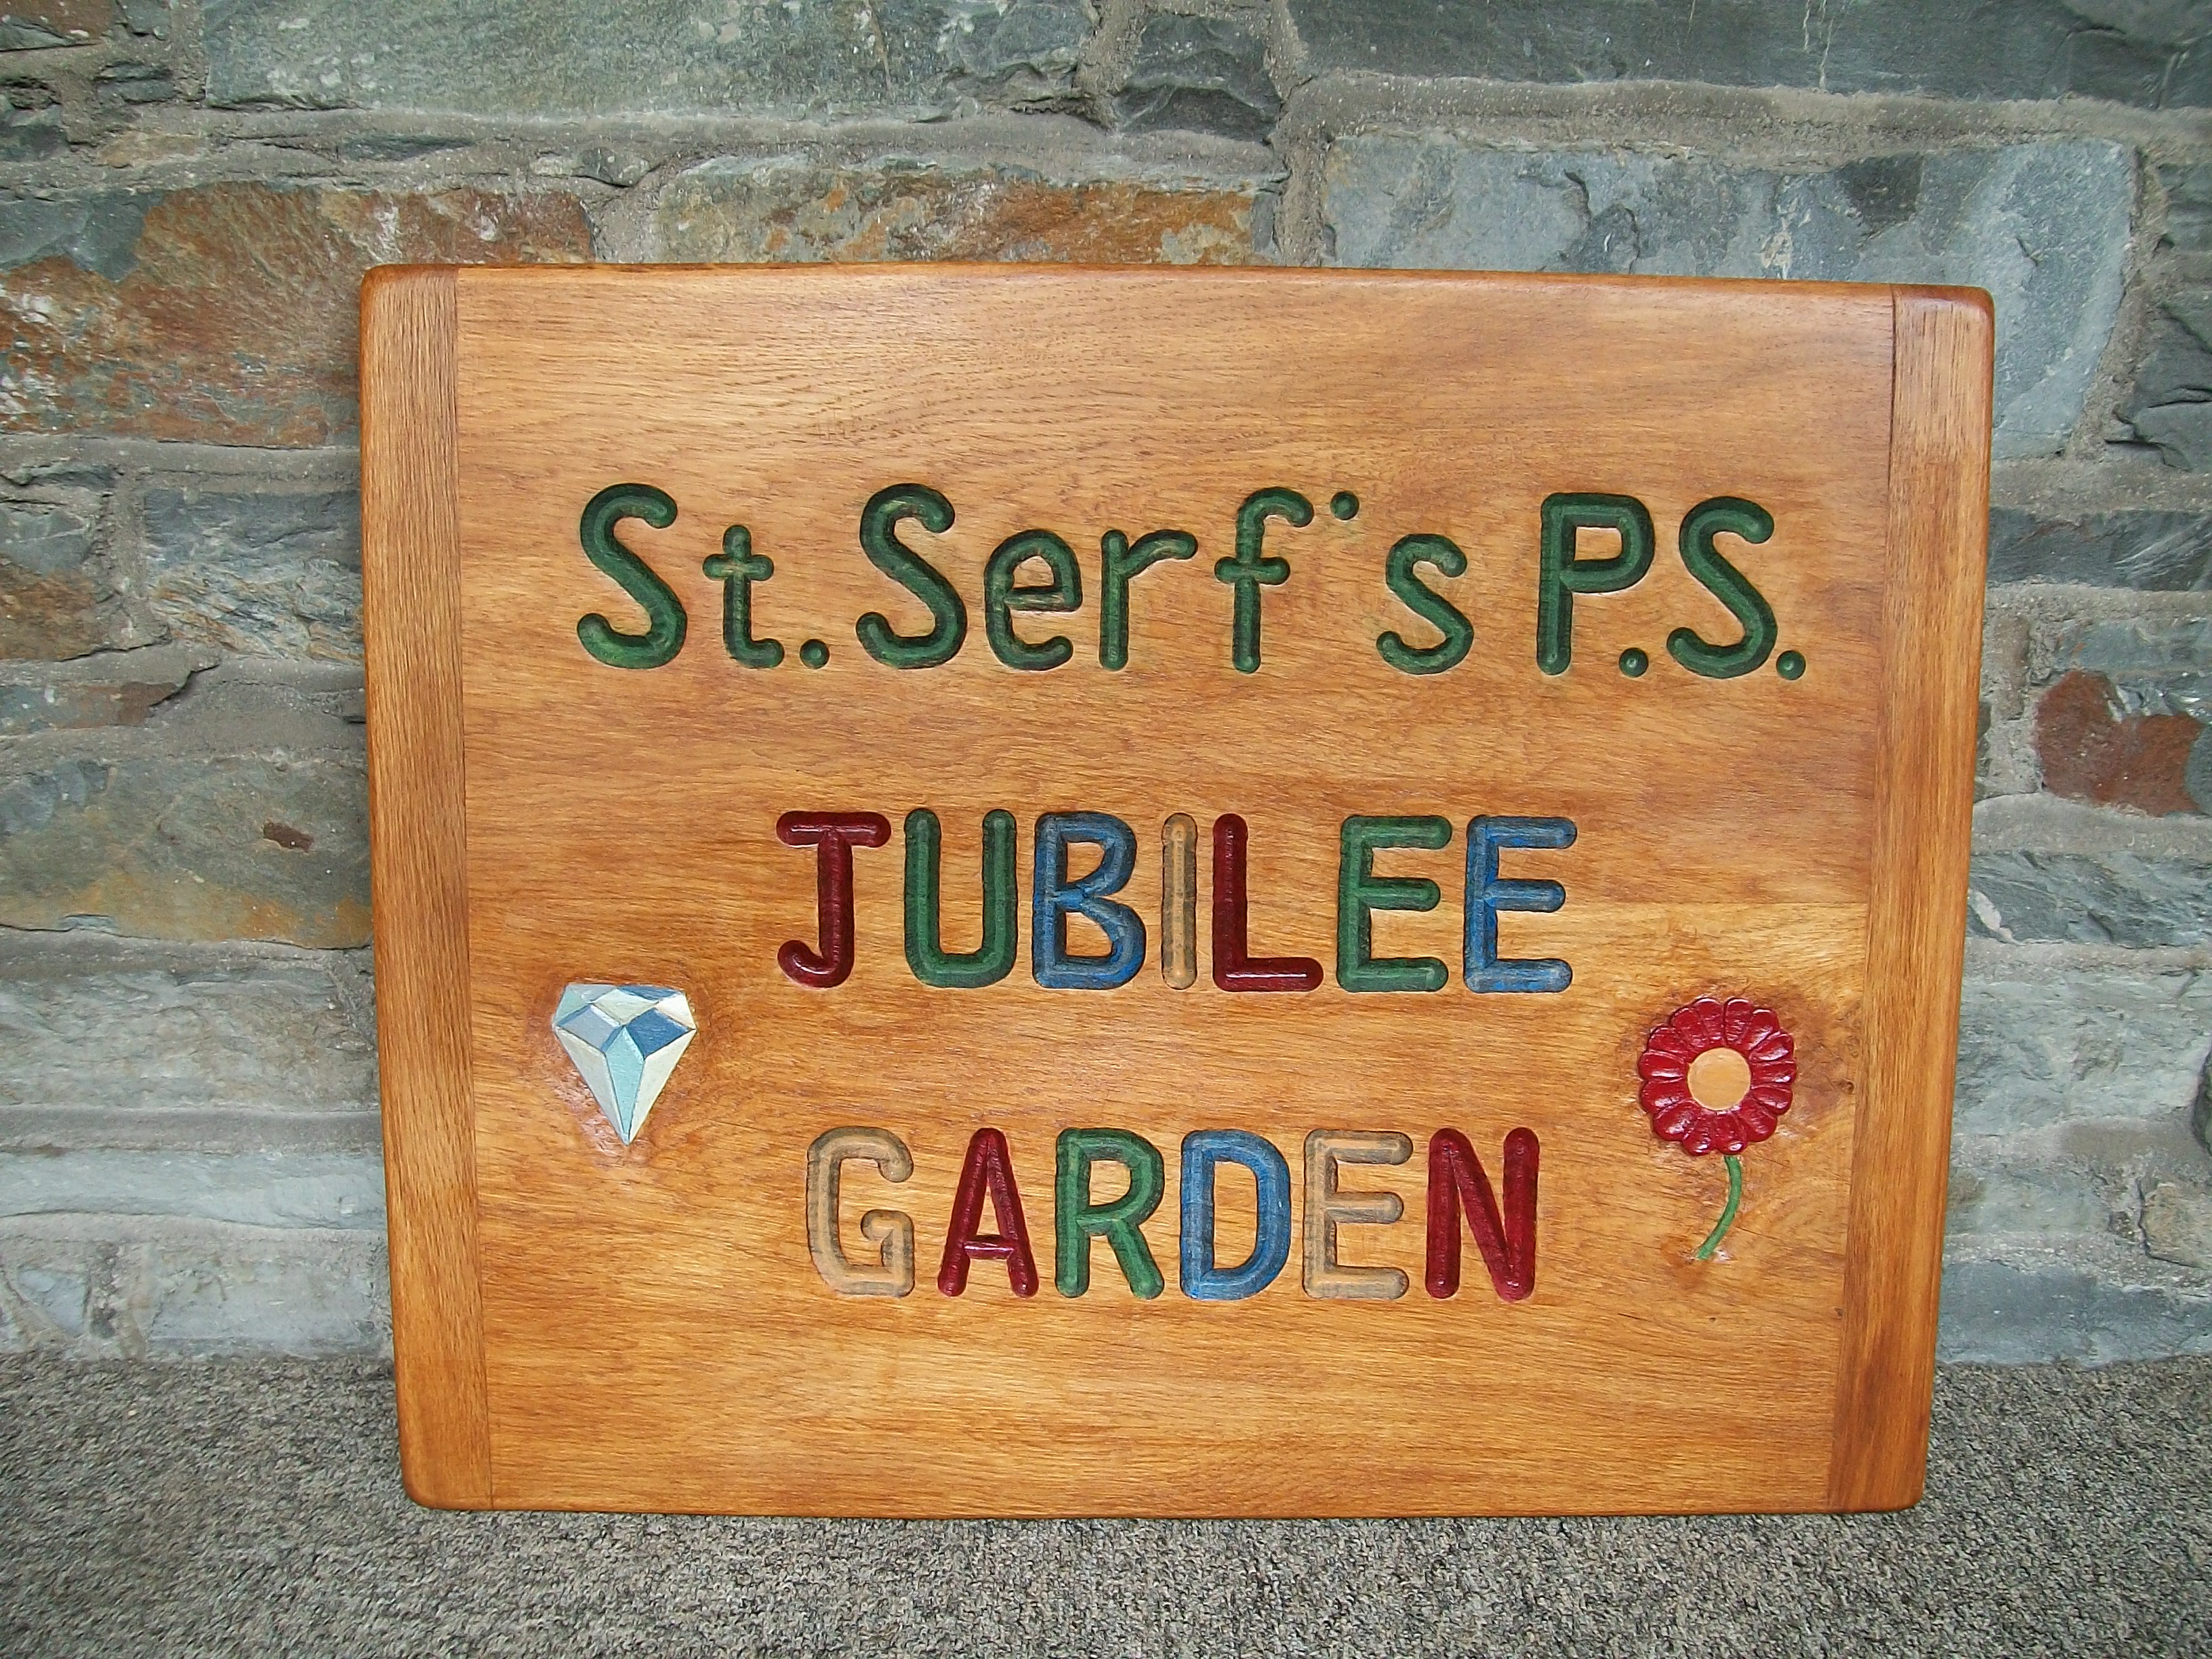 Jubilee garden sign, school playground, eco garden, sign, oak, hand-carved, hand-painted, friendship garden, designed by pupils, outdoor learning,